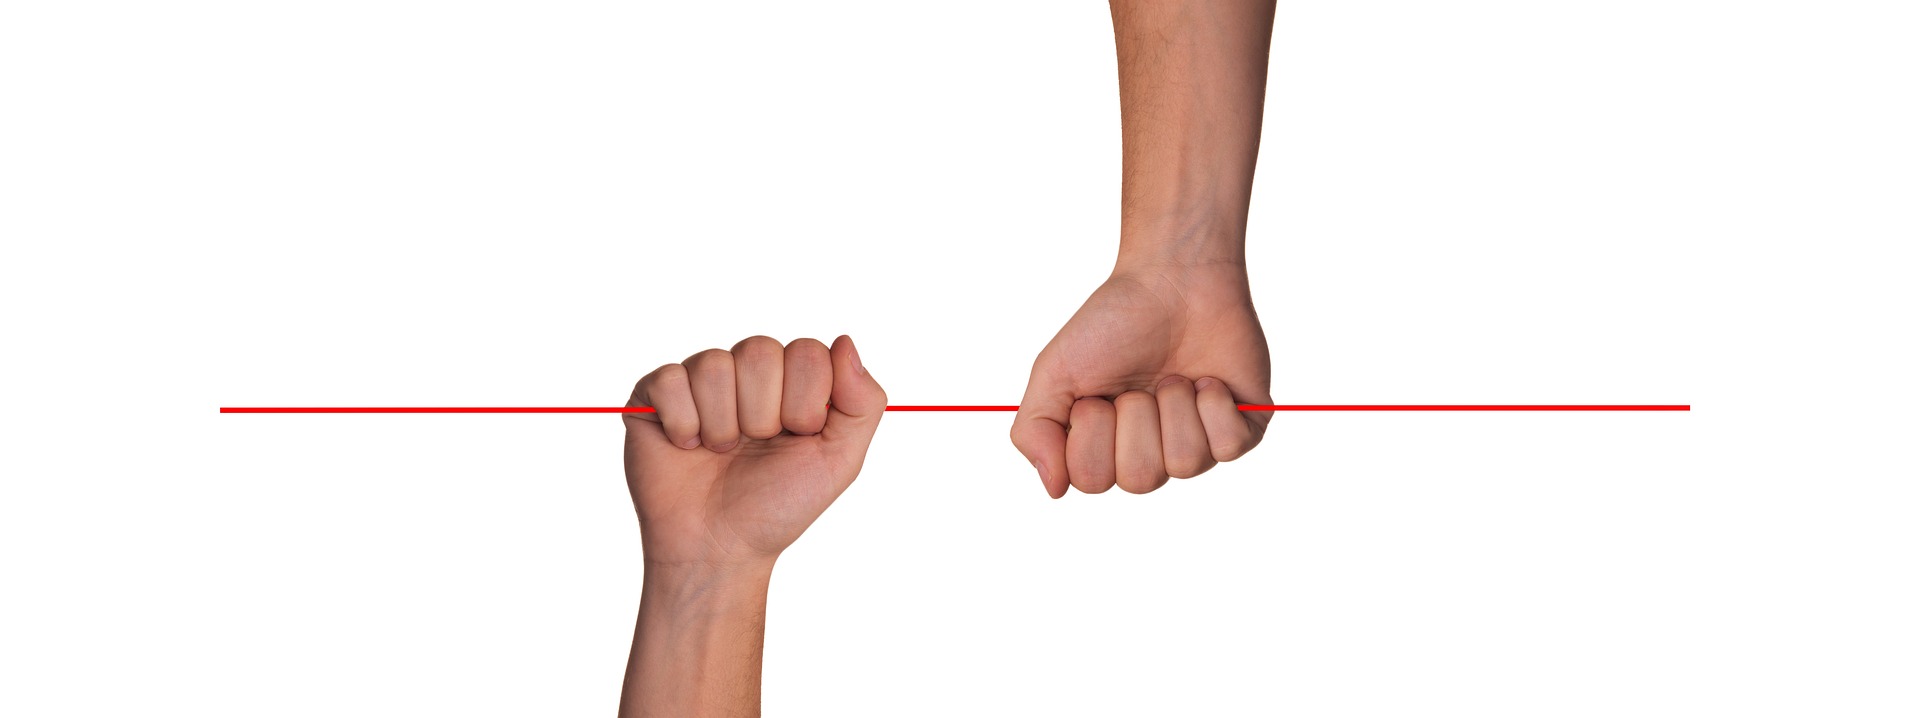 two hands holding a red thread